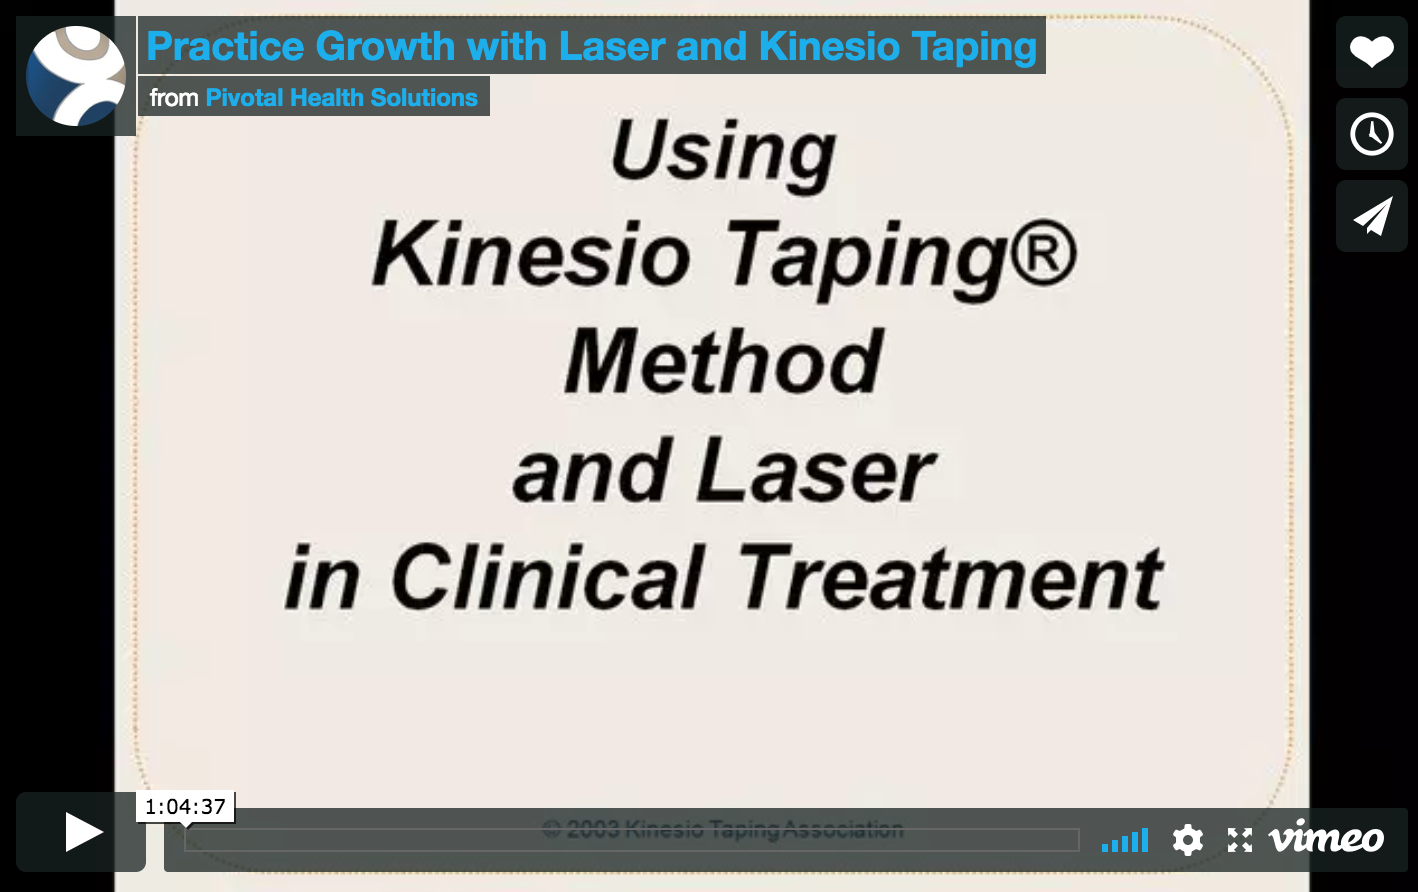 Laser and Kinesio Taping